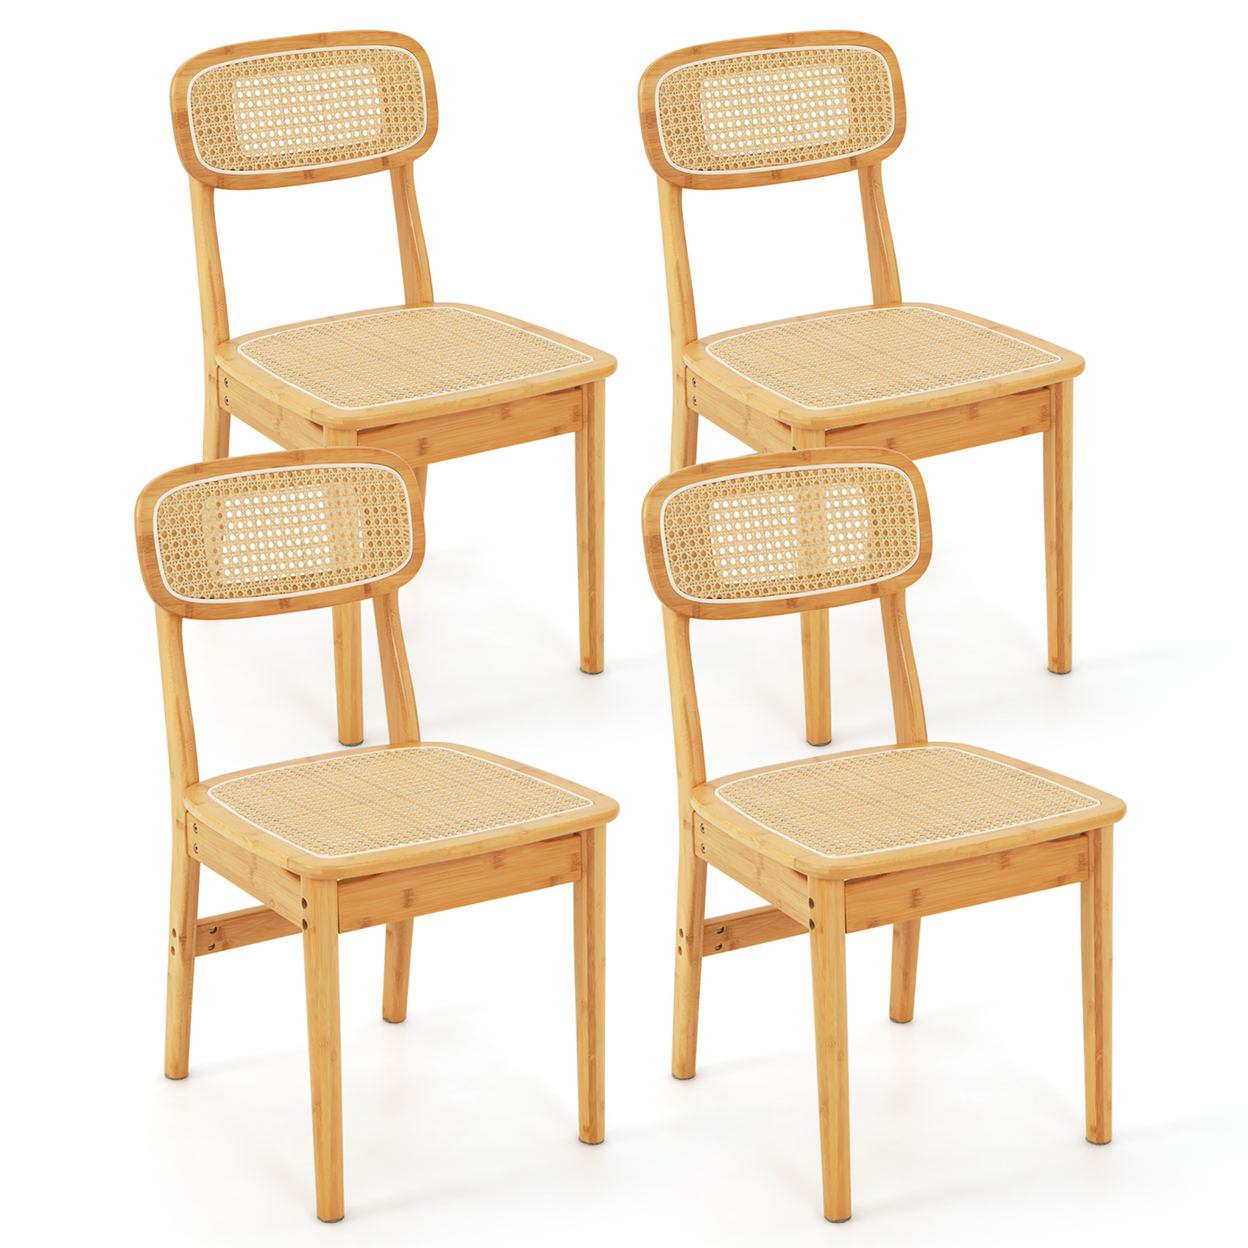 Rattan Dining Chairs Set Of 2 Kitchen Dining Chairs W/ Simulated Rattan Backrest